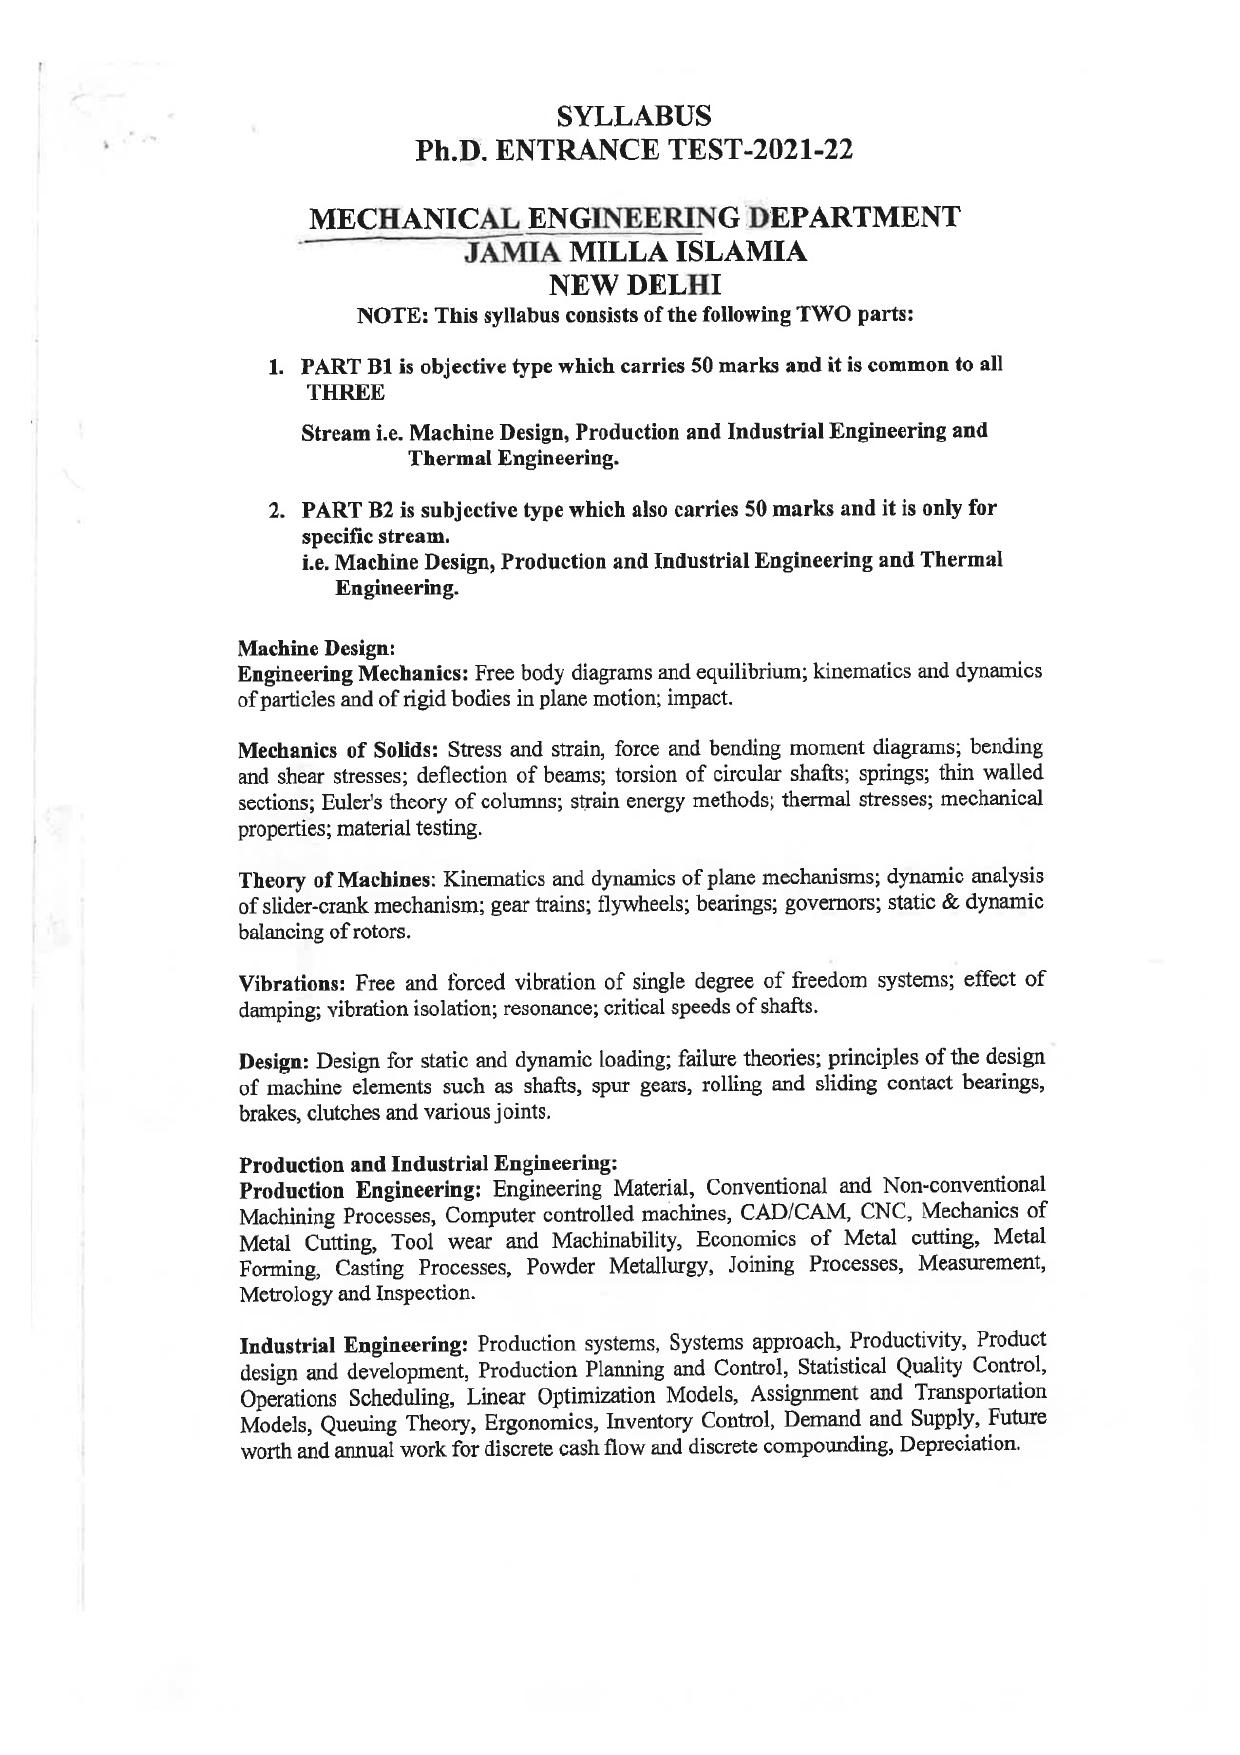 JMI Entrance Exam FACULTY OF ENGINEERING & TECHNOLOGY Syllabus - Page 2